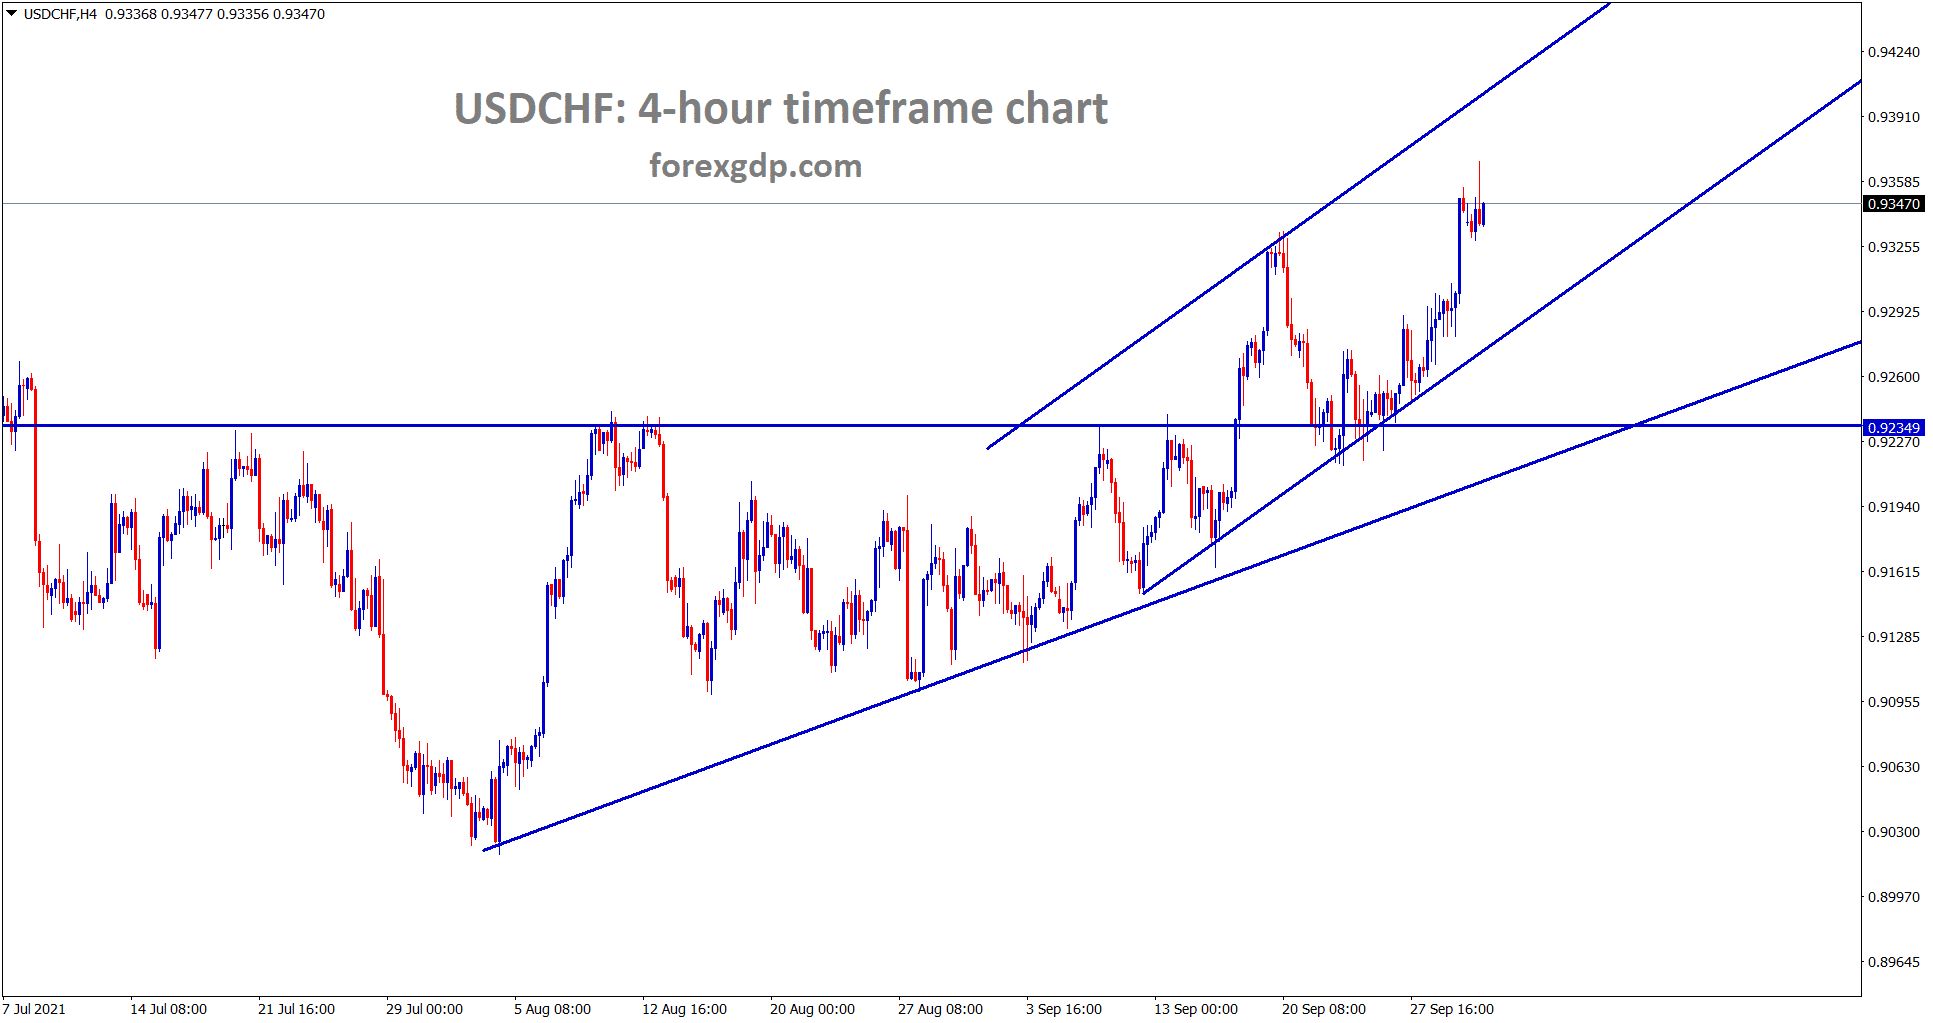 USDCHF is moving in an uptrend now forming higher highs and higher lows